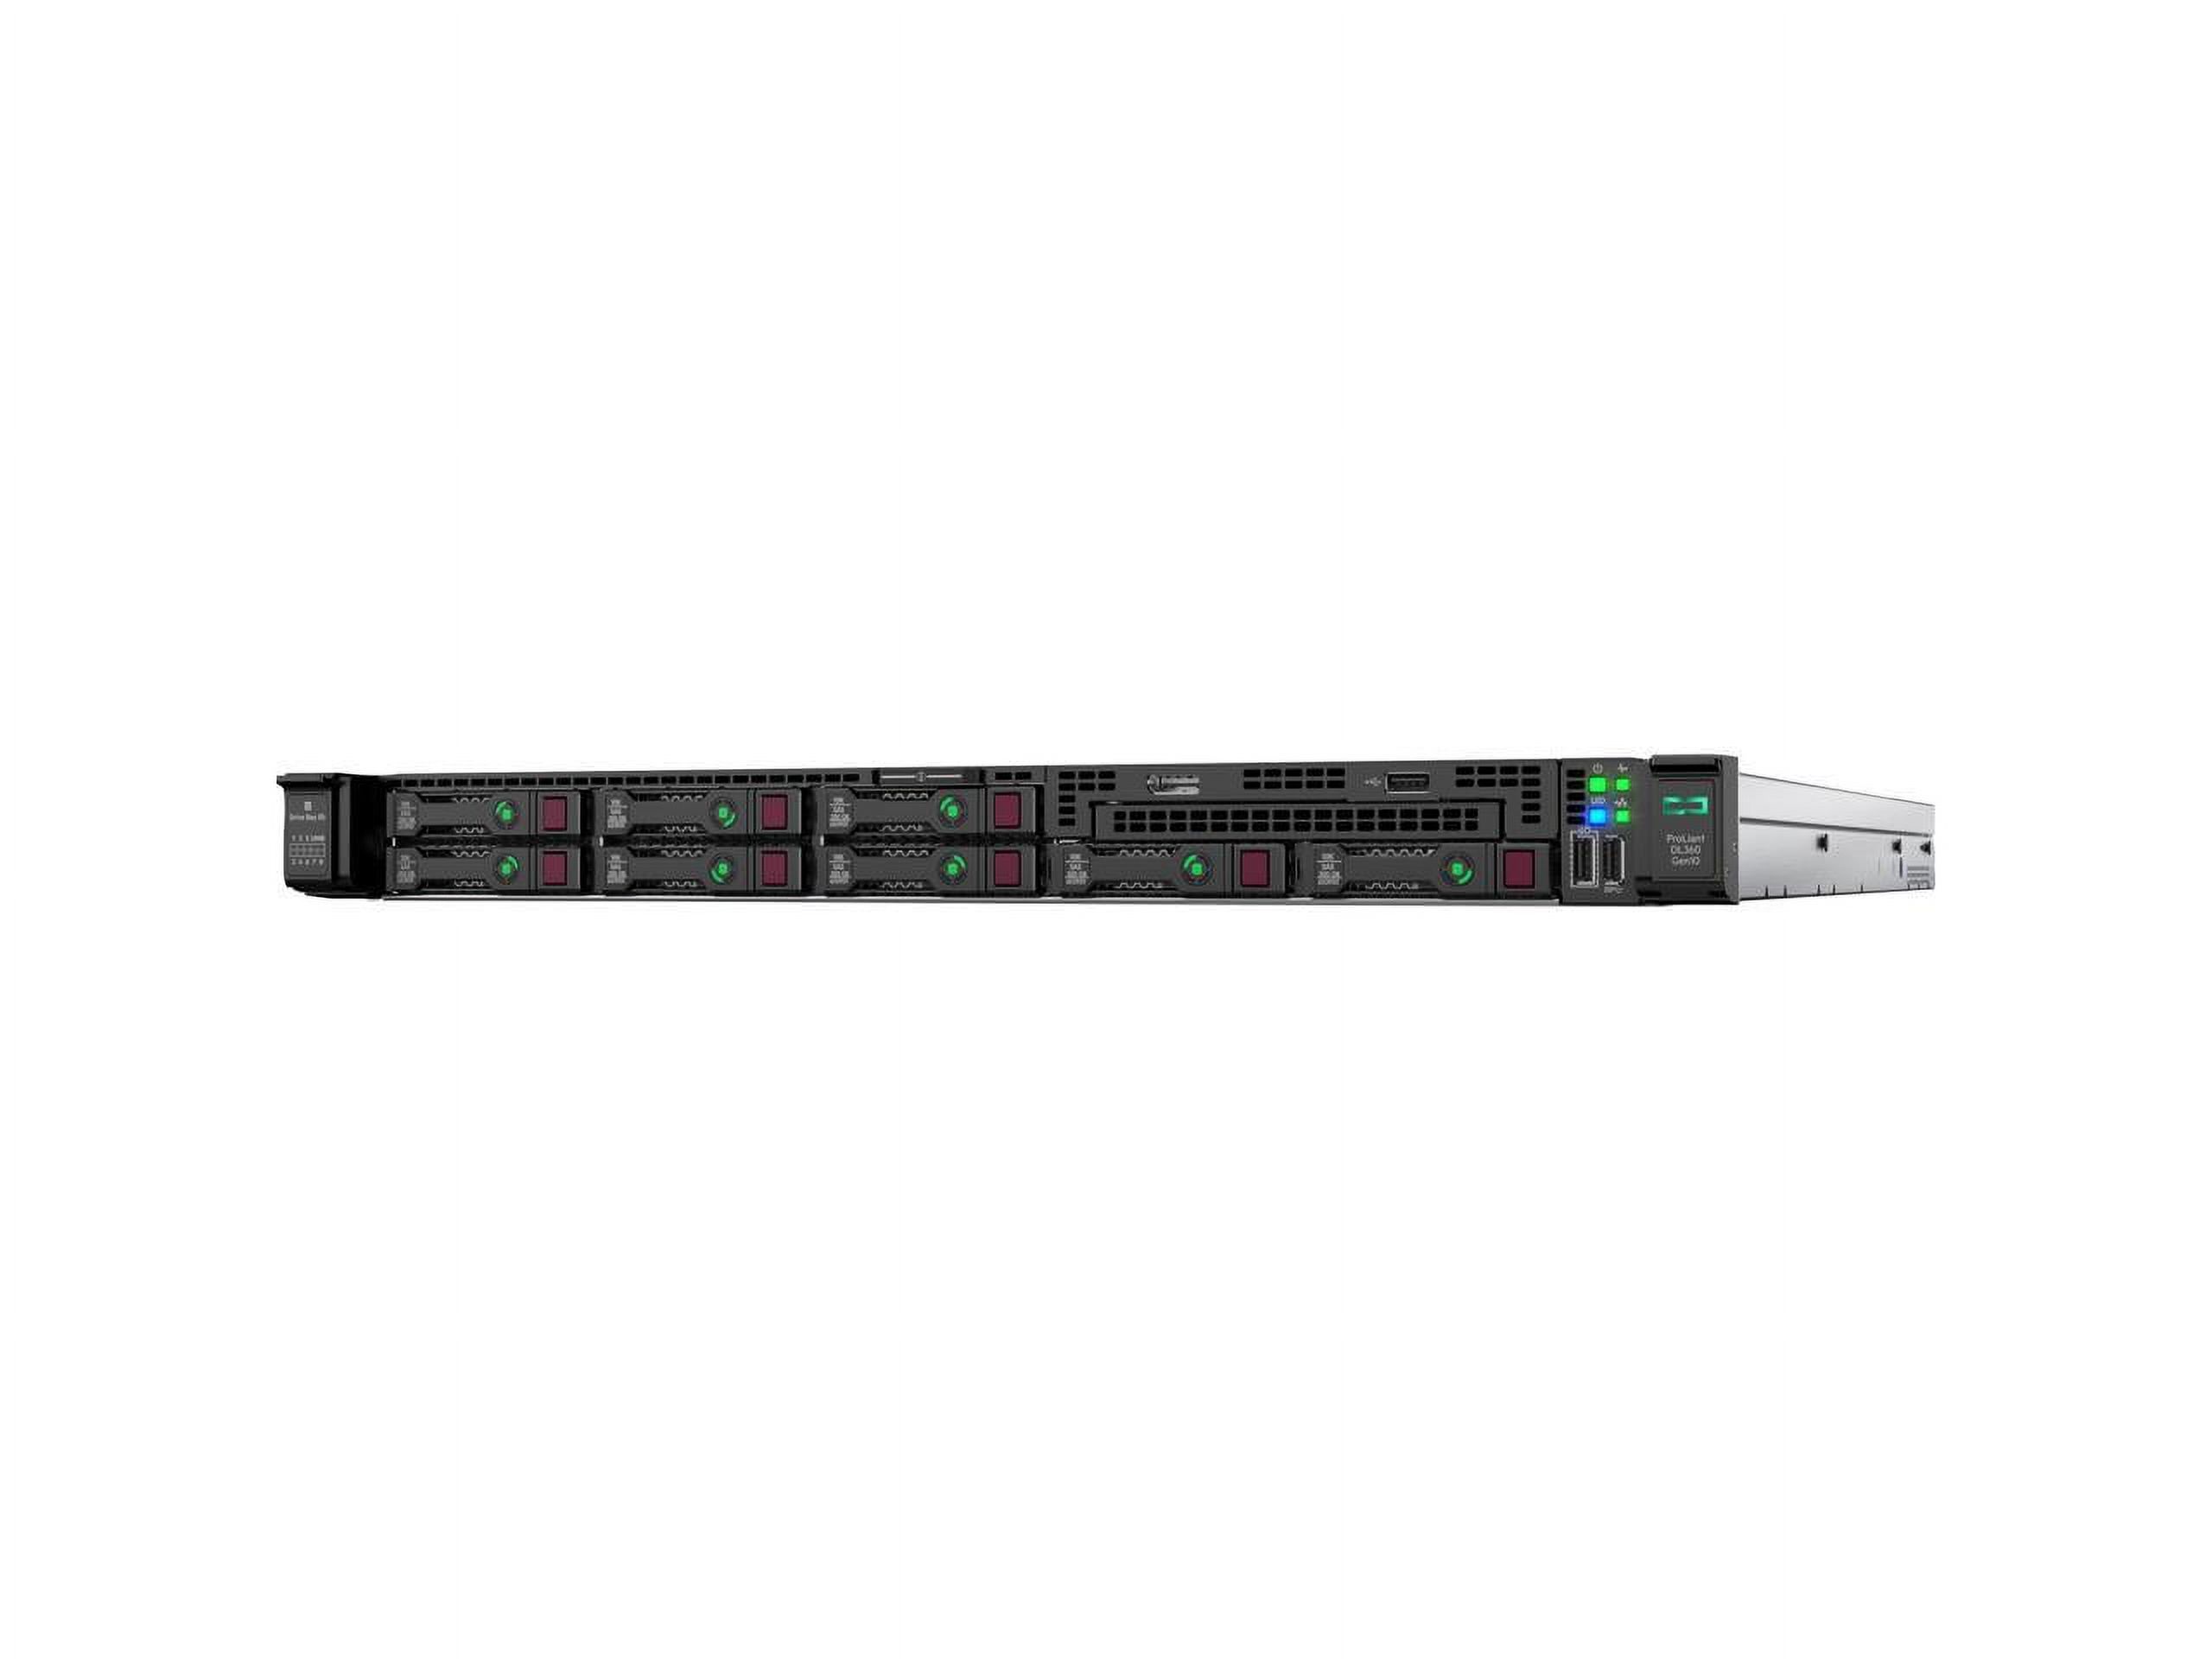 HPE ProLiant DL360 G10 1U Rack Server - 1 x Intel Xeon Silver 4208 2.10 GHz - 32 GB RAM - Serial ATA, 12Gb/s SAS Controller - Intel C621 Chip - 2 Processor Support - 1.54 TB RAM Support - Up to 16 MB - image 4 of 5